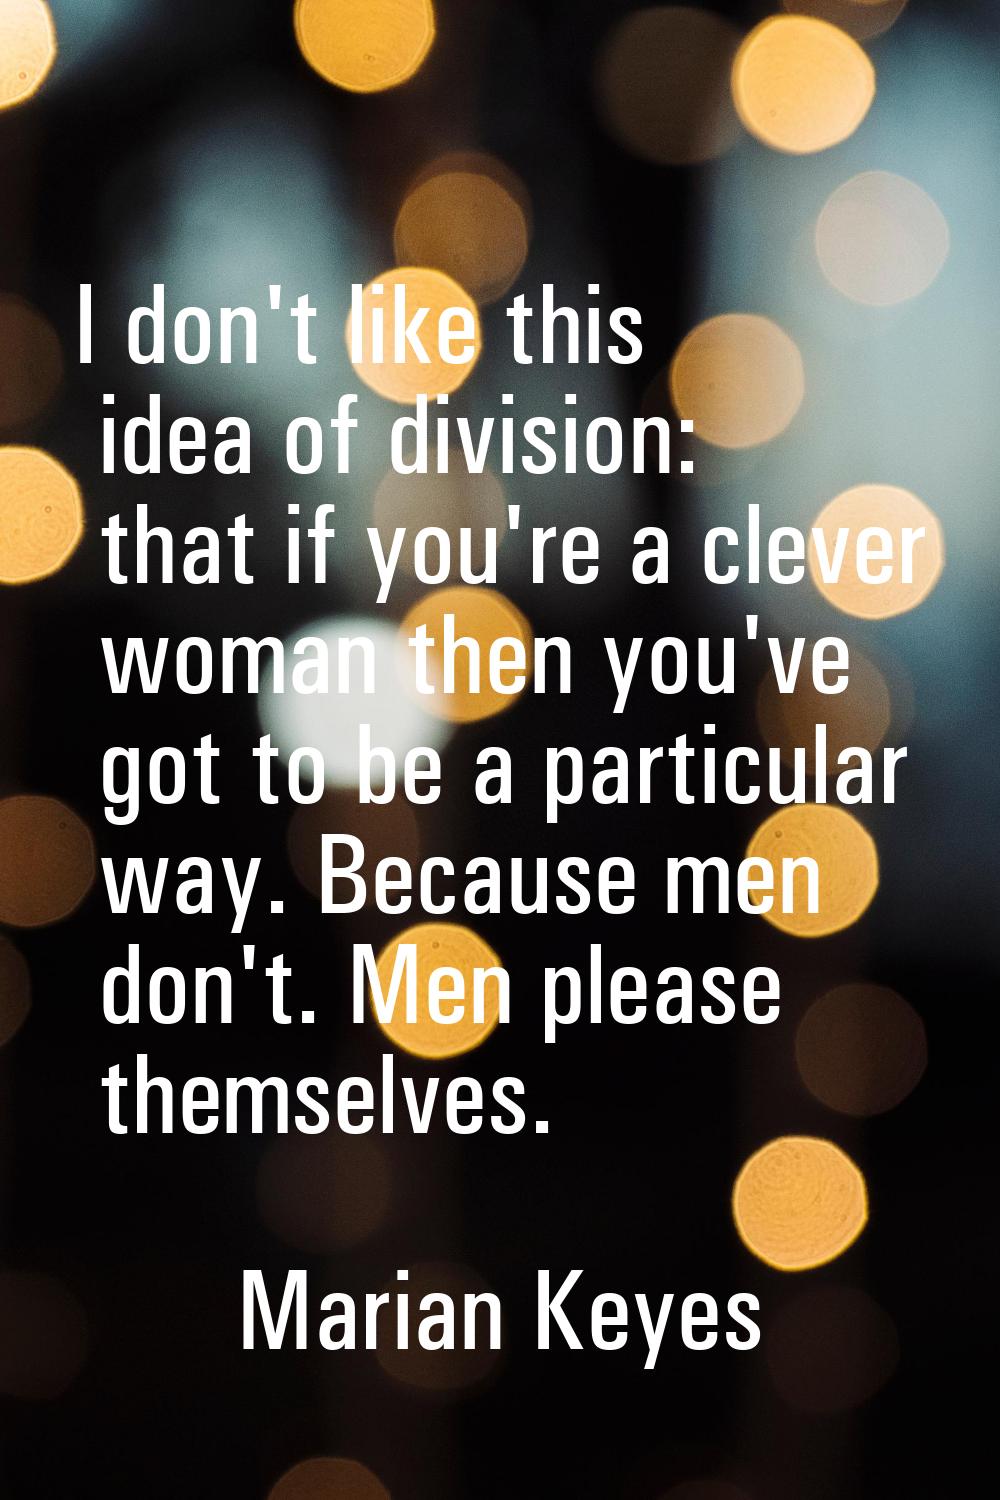 I don't like this idea of division: that if you're a clever woman then you've got to be a particula